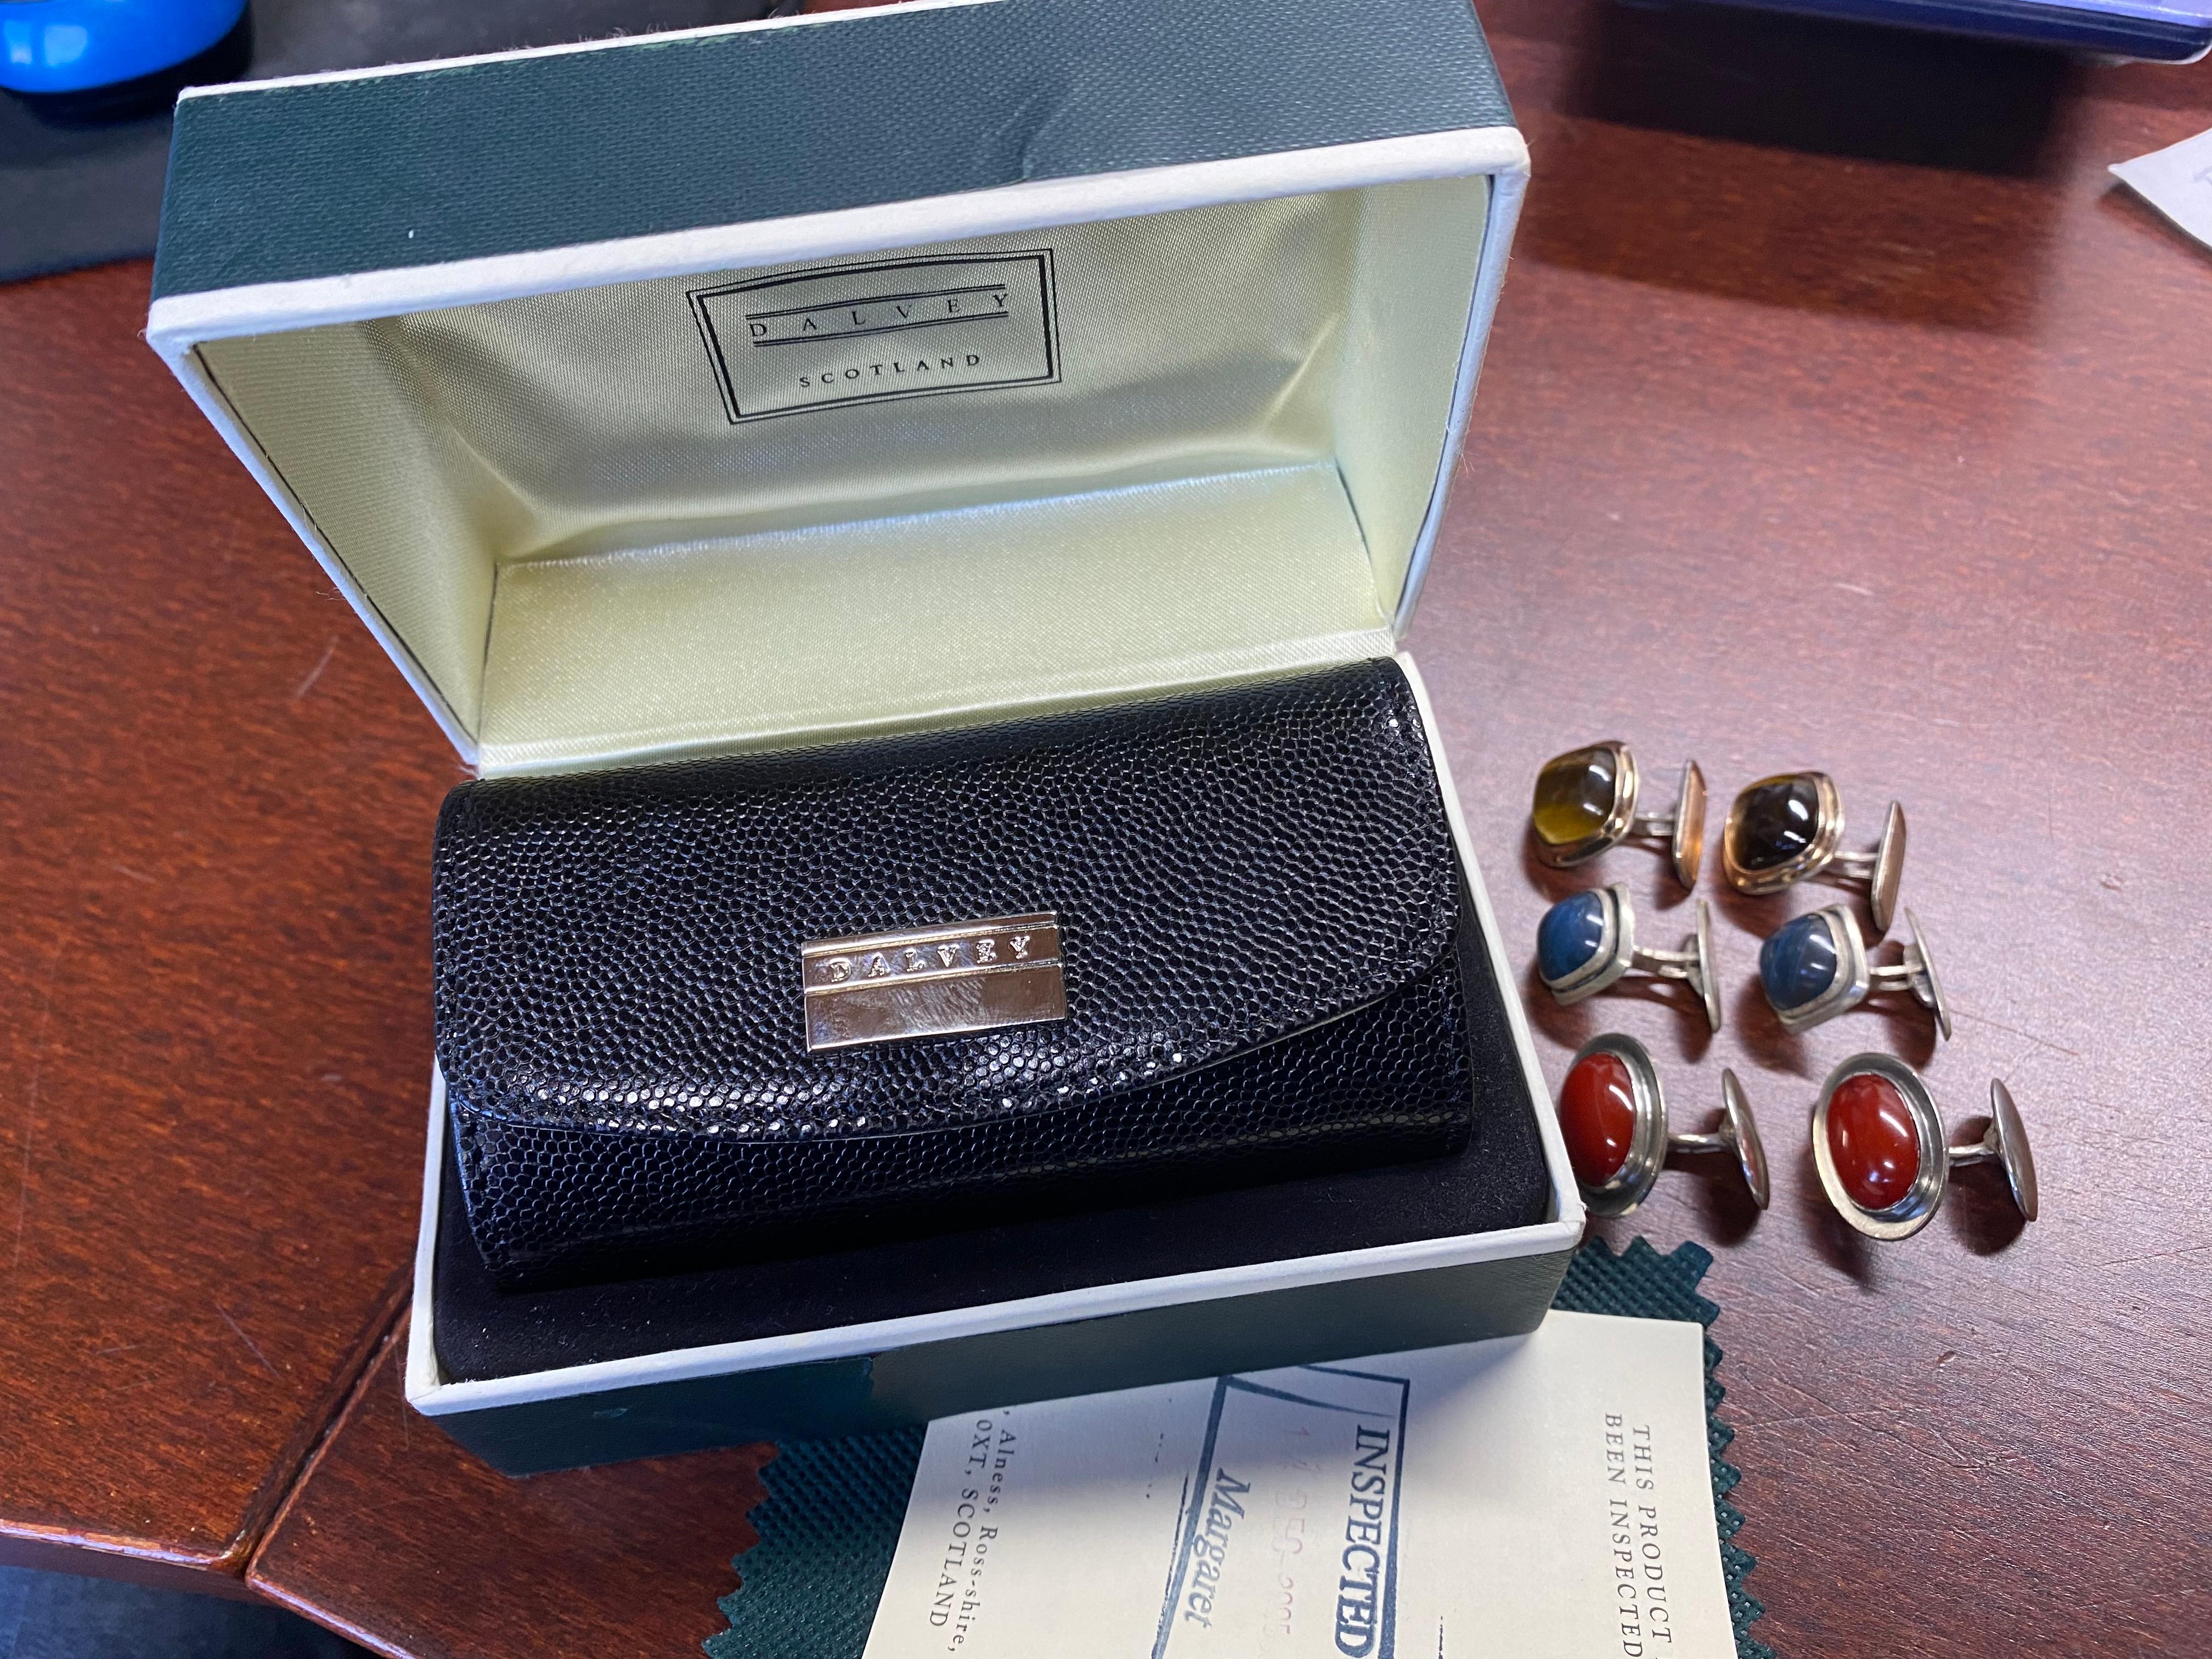 3 Pair of Silver Cufflinks Scandinavian Modern.
Cufflinks 1960s-1964s.
On the Red Stones Finland 1966.
Tiger eye 835? VG Sweden
and blues from Sweden? in them stamps O9? 1964?
All in silver.
No engravings.
Comes with unused  Leather Case.
Davely